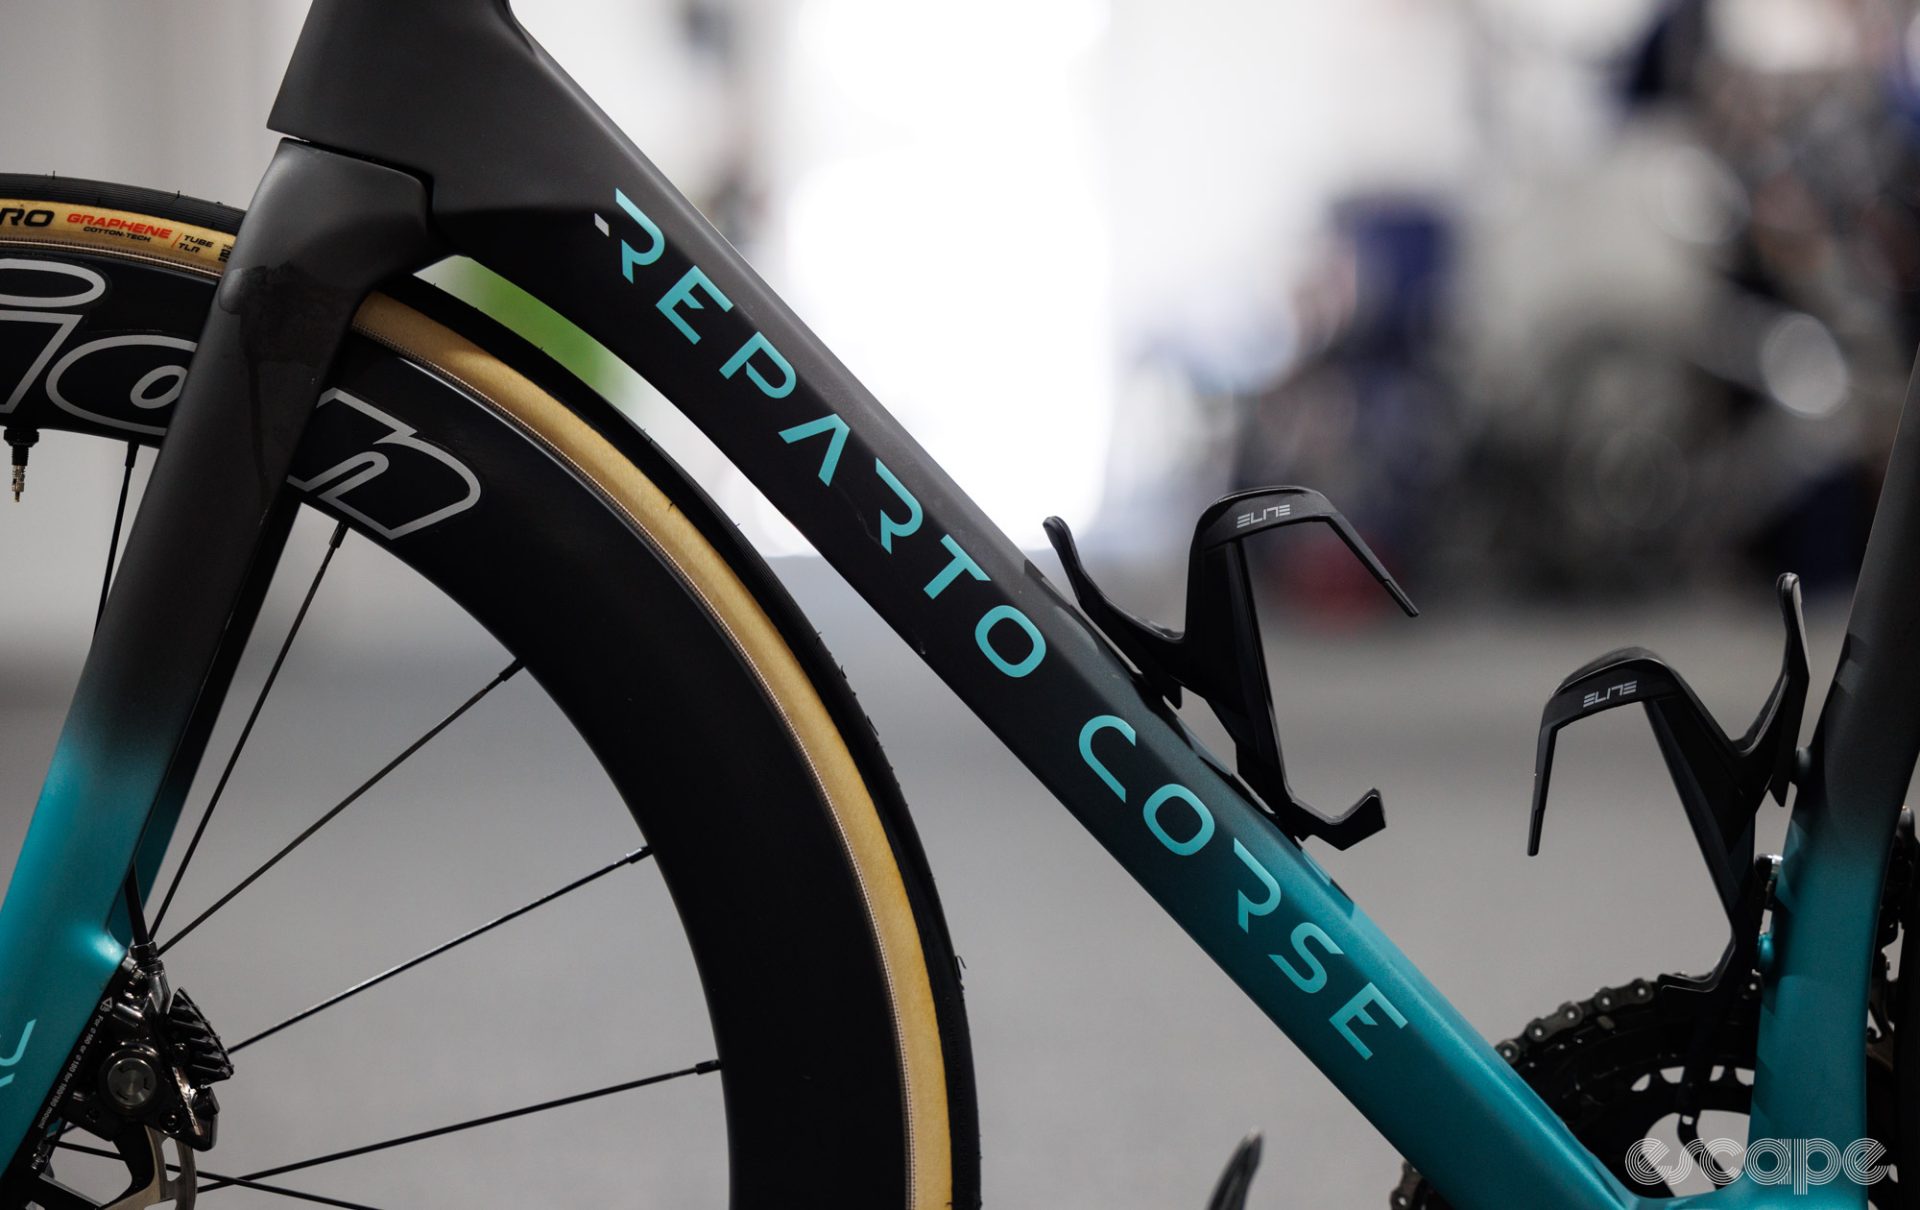 A downtube of a Specialissima with Bianche's Reparto Corse (race division) logo.